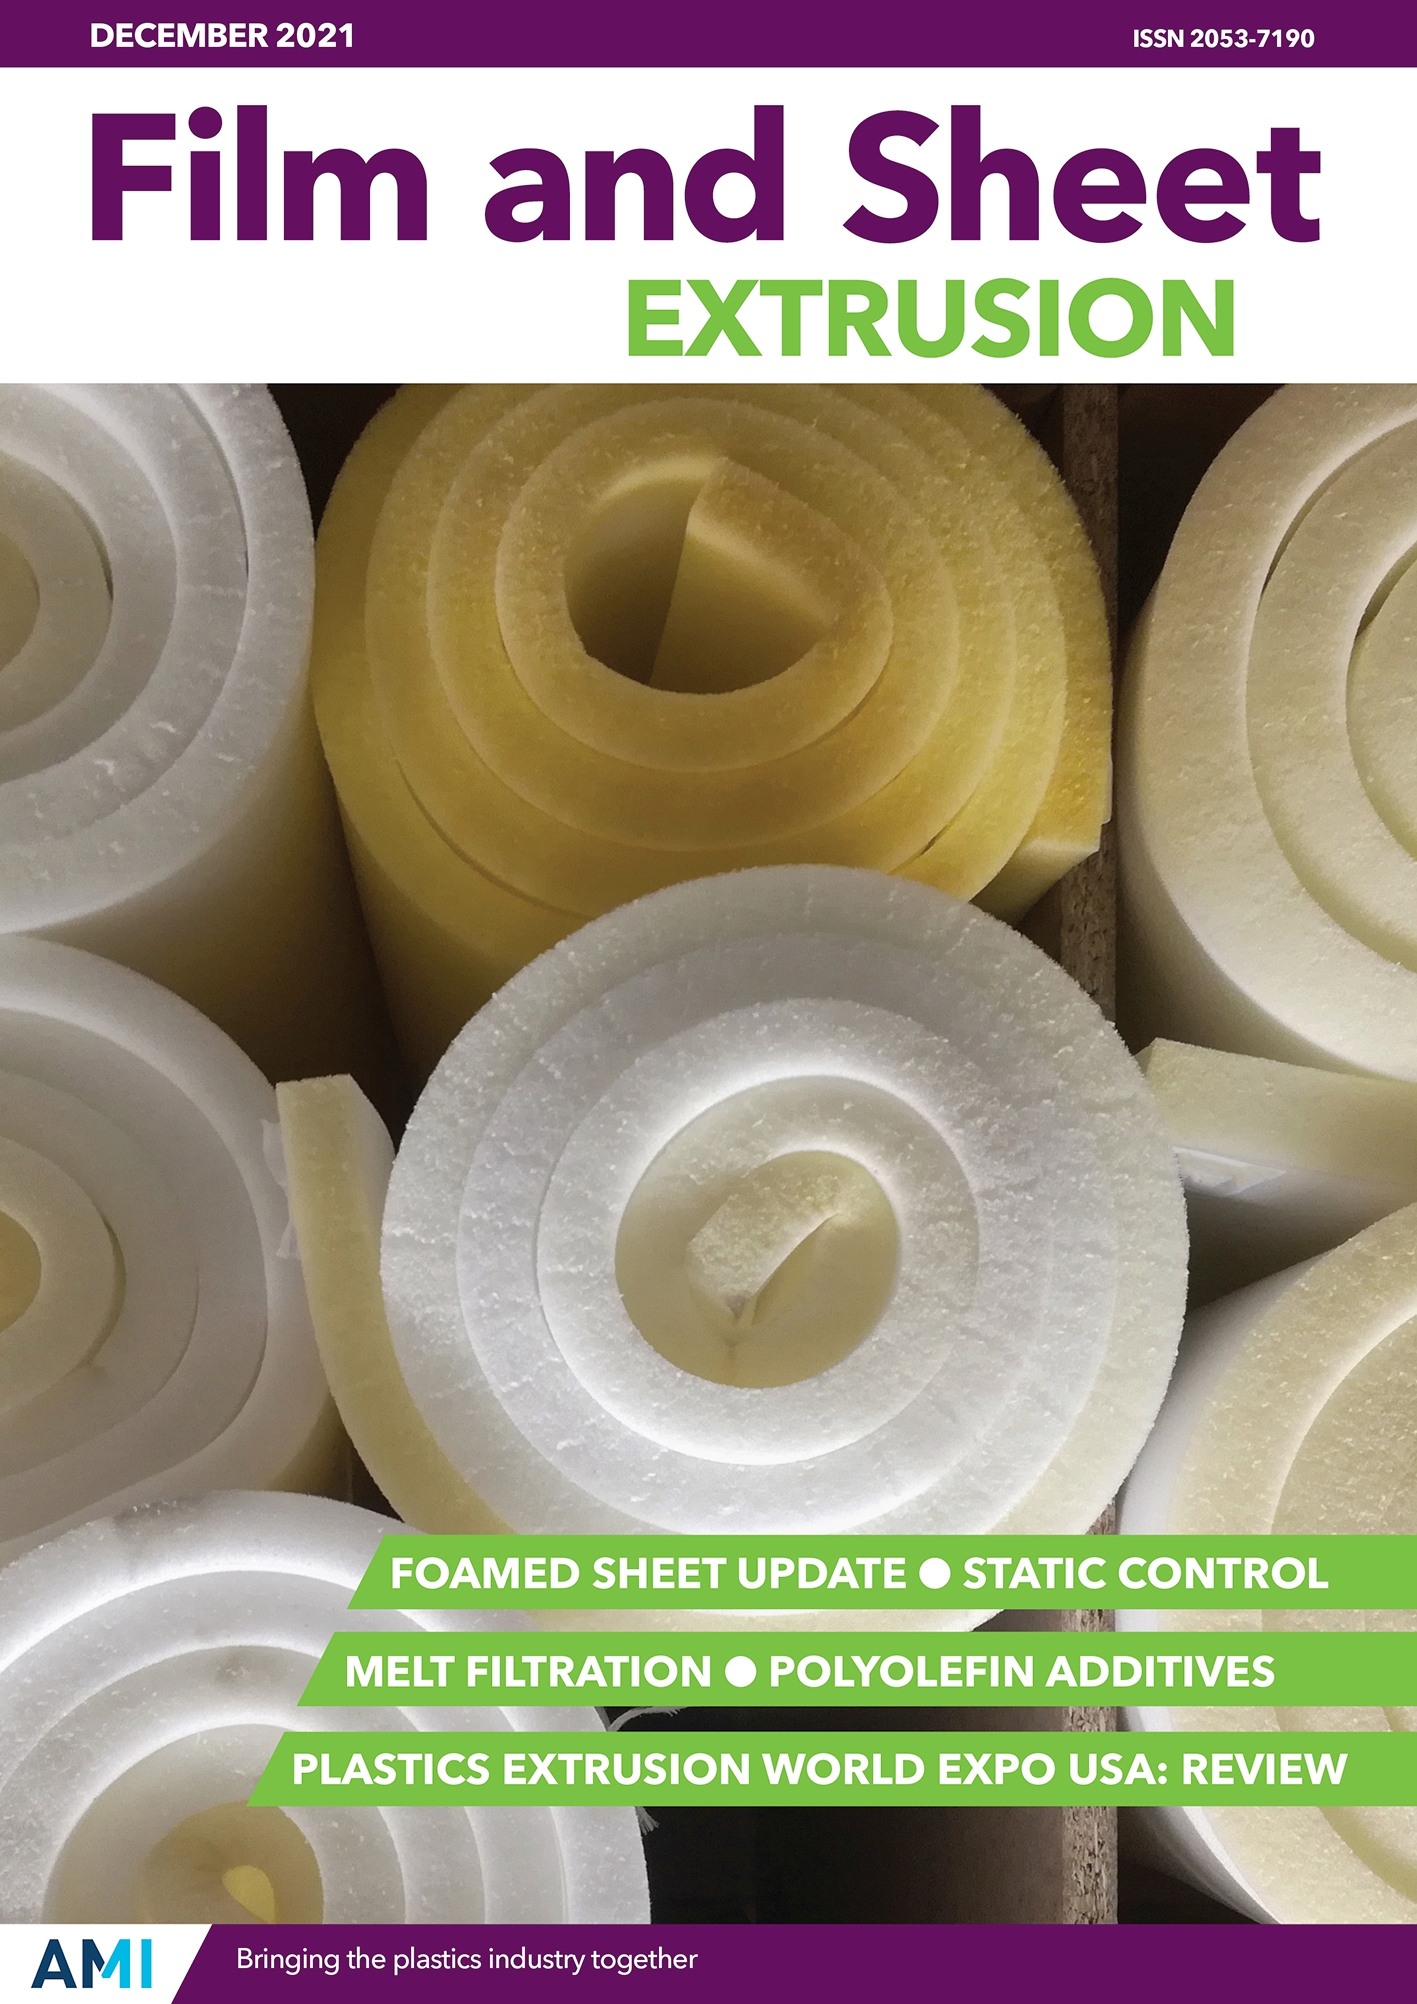 Film and Sheet Extrusion December 2021